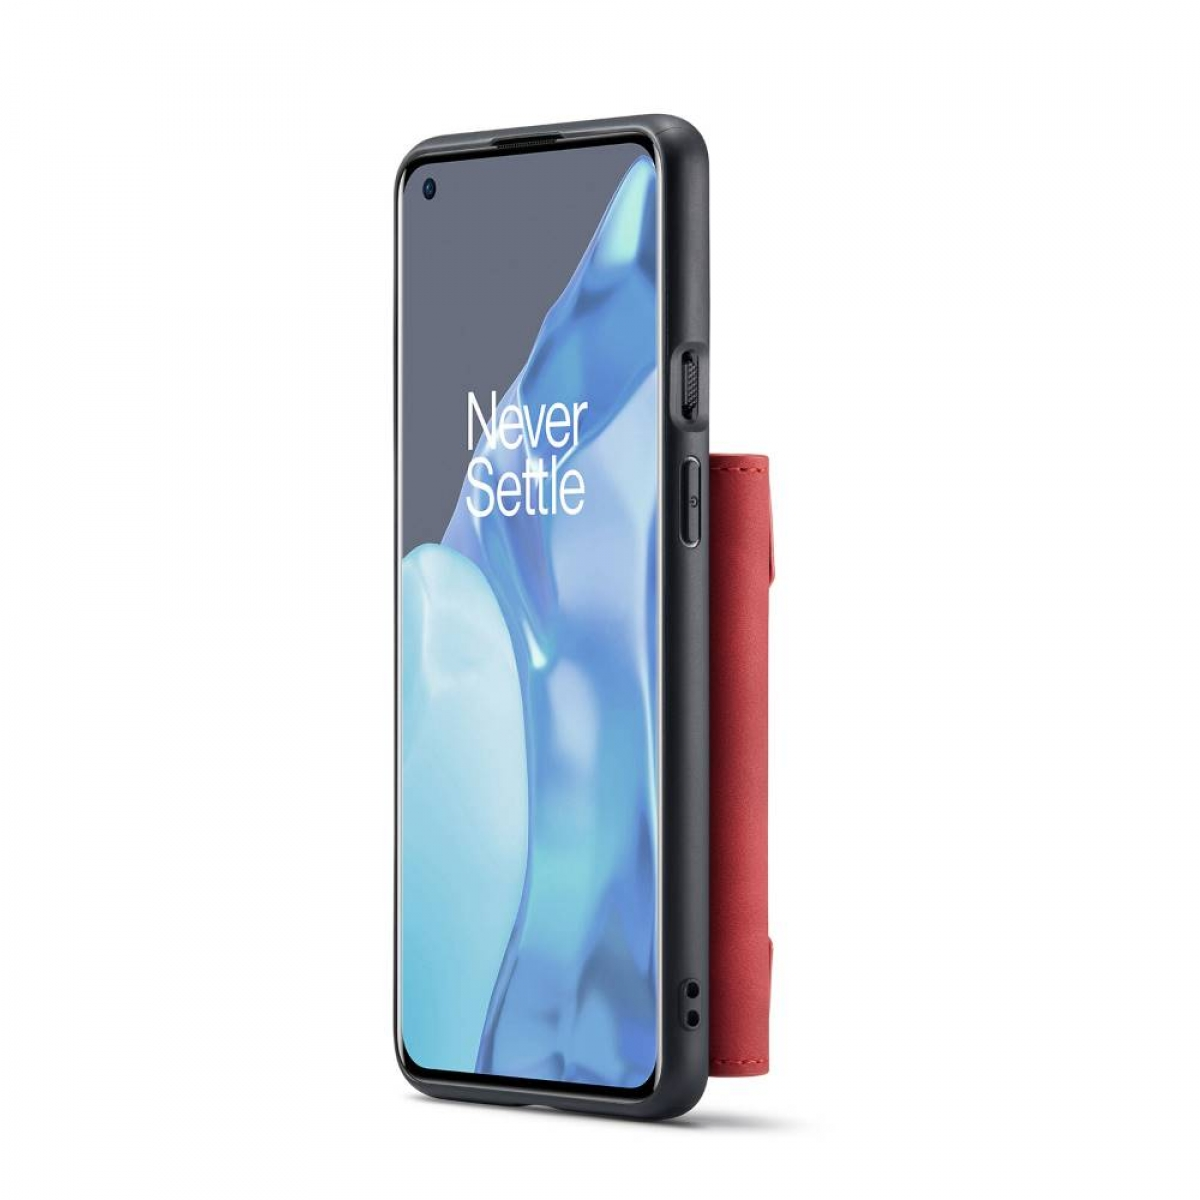 DG MING Rot 2in1, M2 OnePlus, 9, Backcover